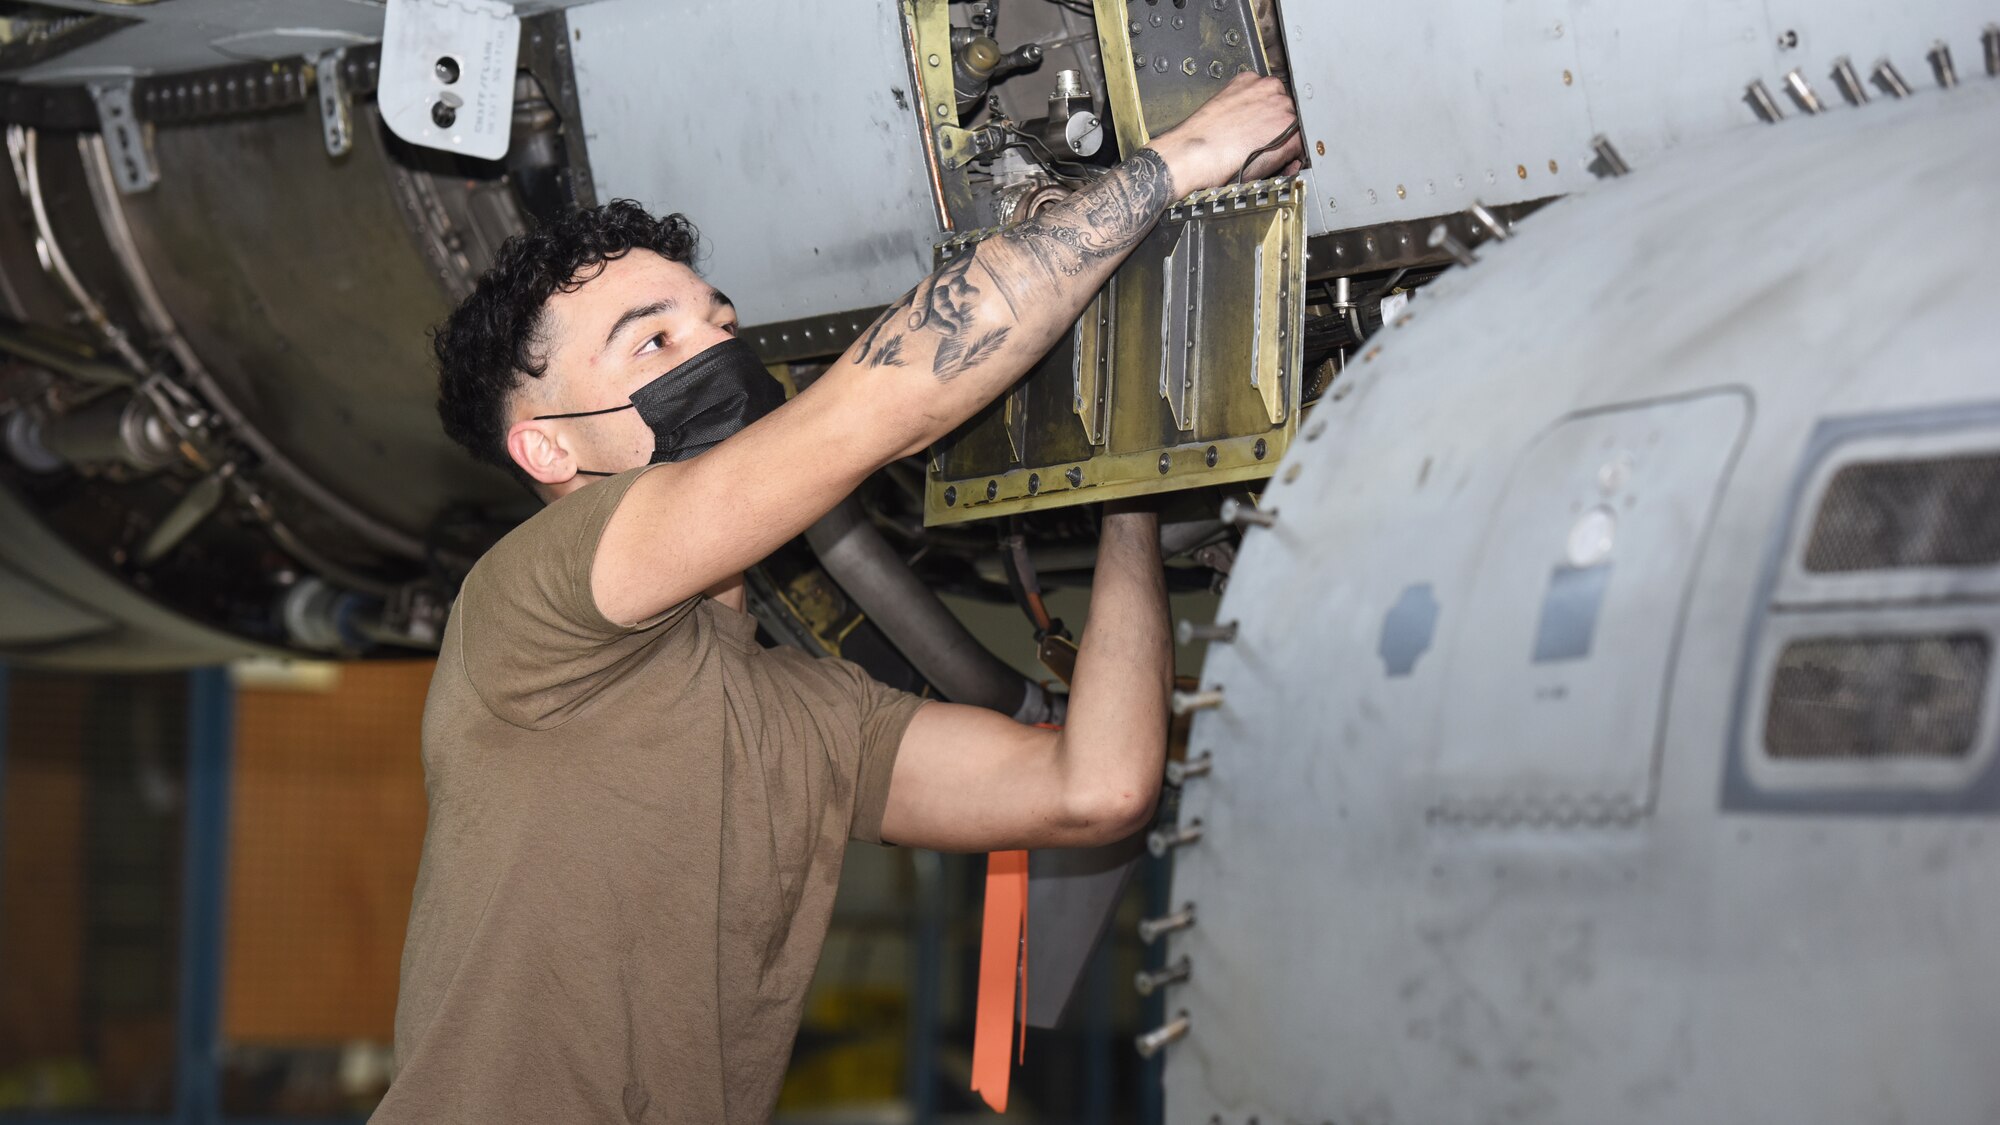 U.S. Air Force Senior Airman Jonathan Jimenez-Barreto, 52nd Maintenance Squadron Aircraft Inspection Journeyman, conducts an aircraft phase inspection on a U.S. Air Force F-16 Fighting Falcon. The inspection and repairs can take up to ten days and allow maintenance flight personnel the opportunity to complete aircraft part changes and repair minor discrepancies. (U.S. Air Force photo by Tech. Sgt. Tony Plyler)